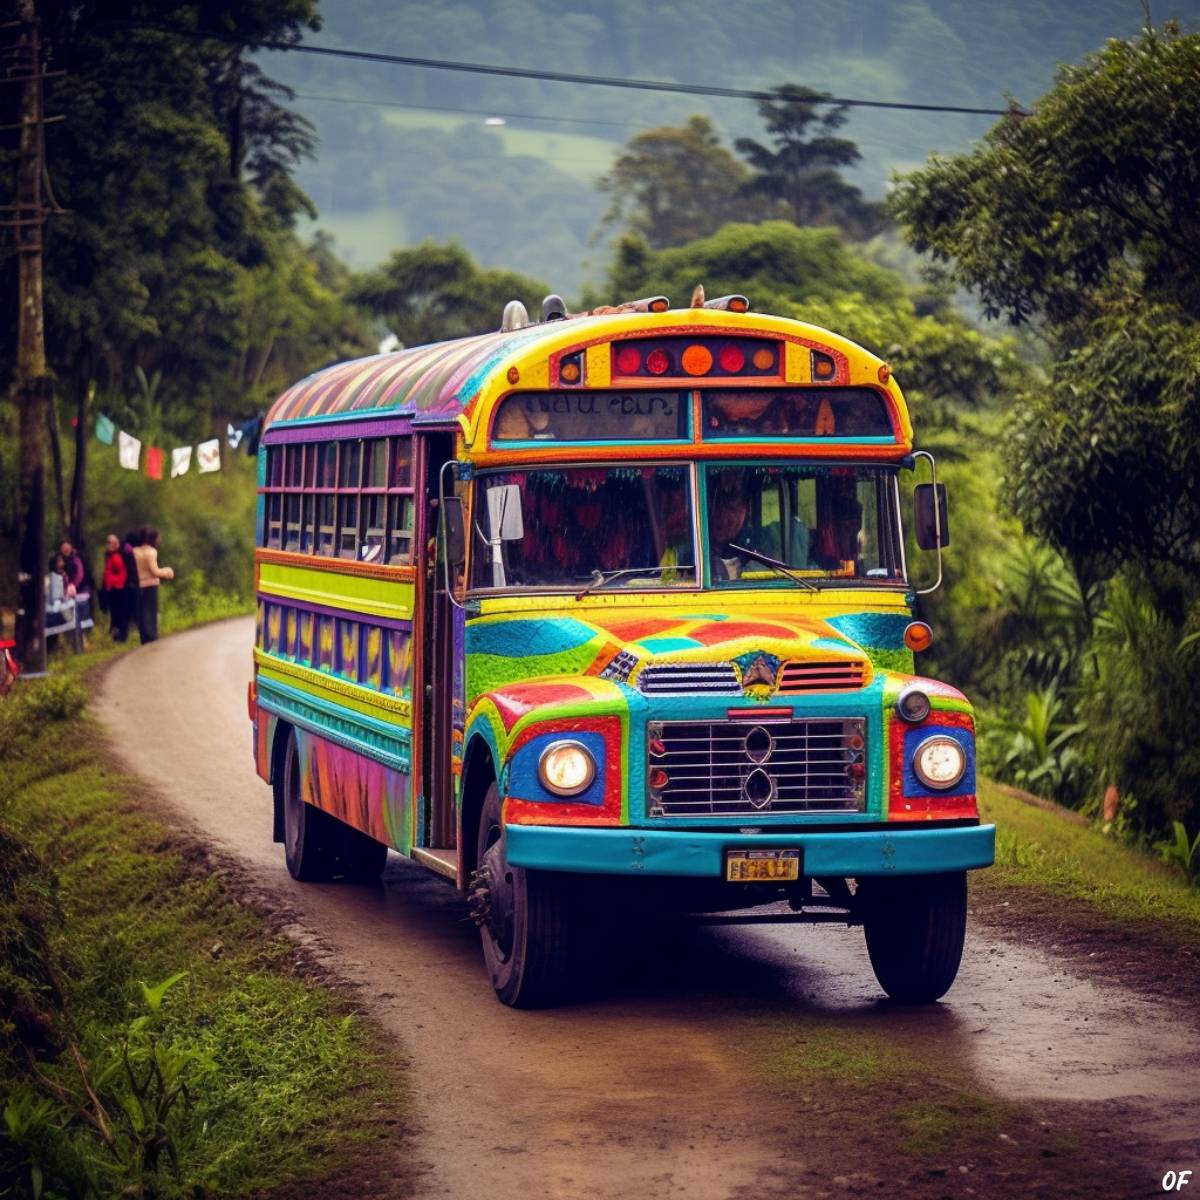 Painted in an exuberant rainbow of vivid colors, the Guatemalan chicken bus, a lovingly retrofitted American school bus, stands out against the lush backdrop of the Central American countryside.